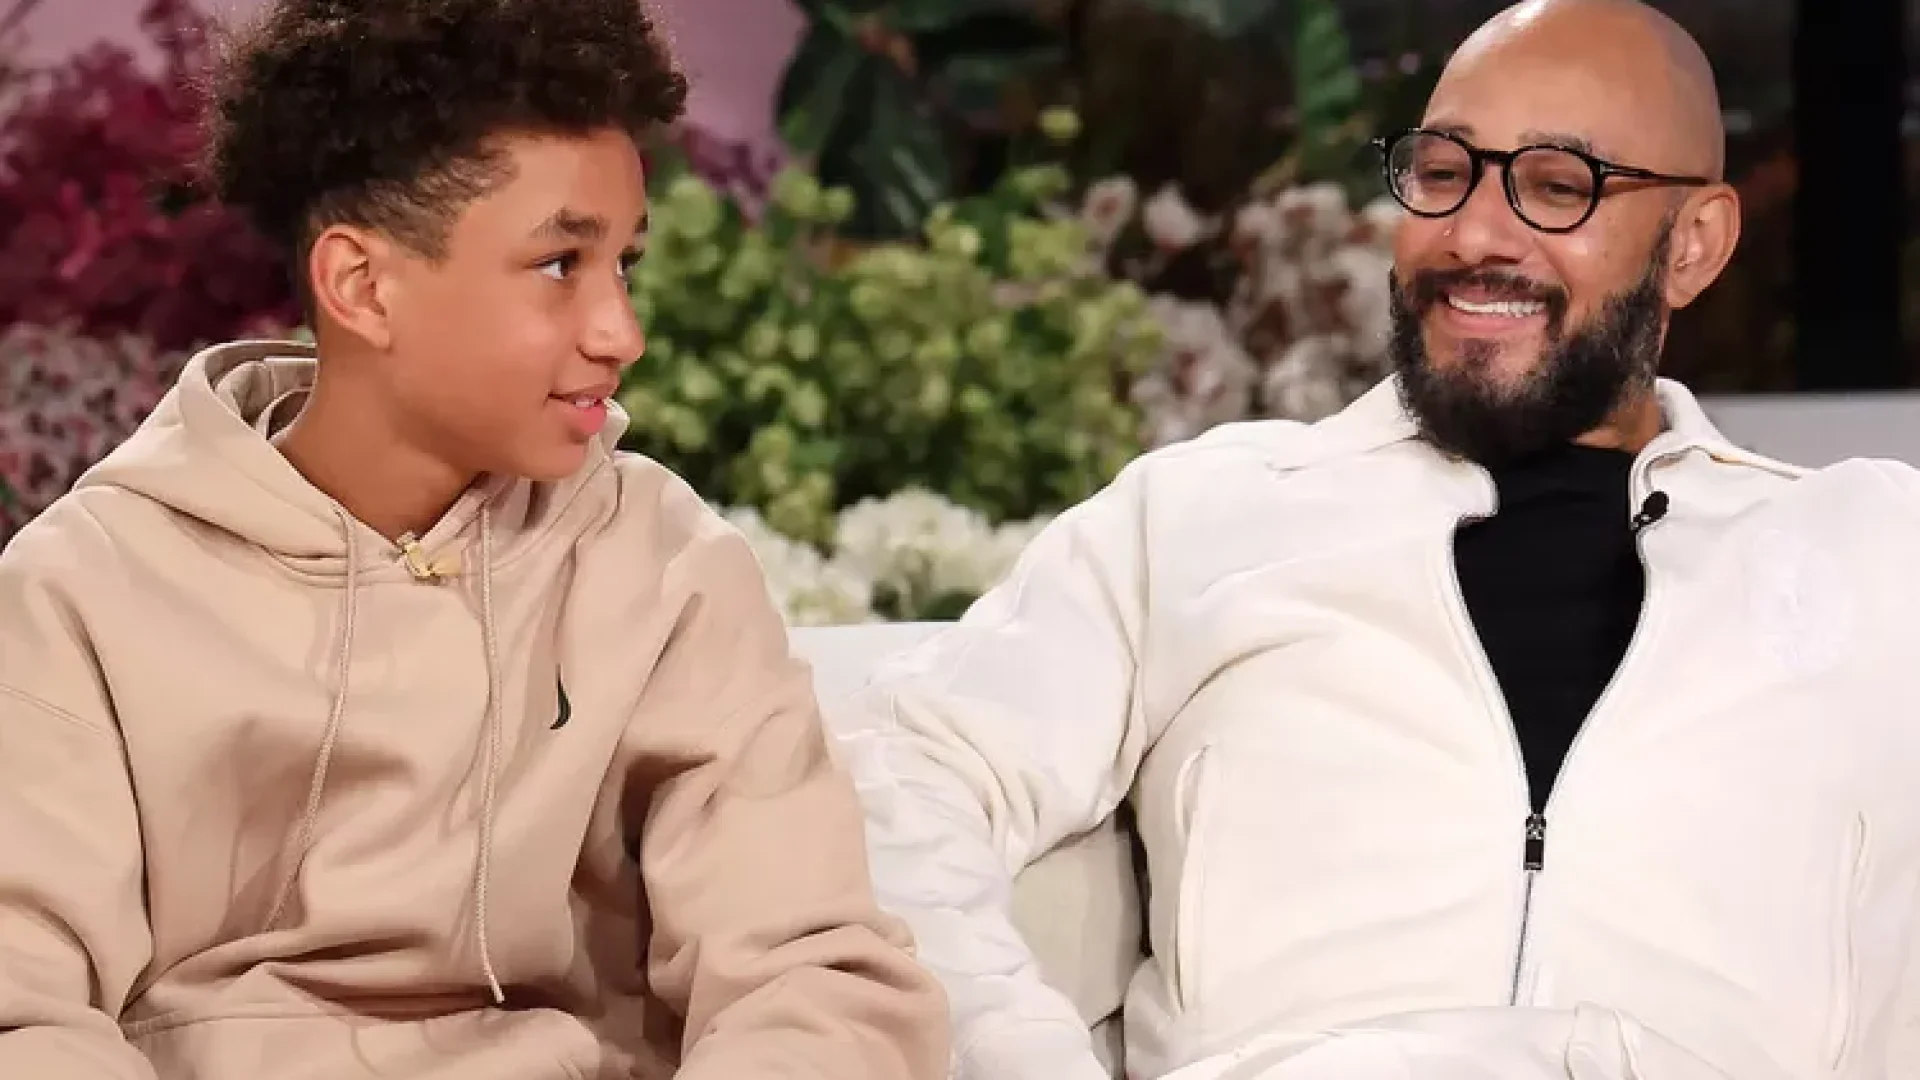 Alicia Keys And Swizz Beatz's Son, Egypt Isn't Interested In Pursuing Music